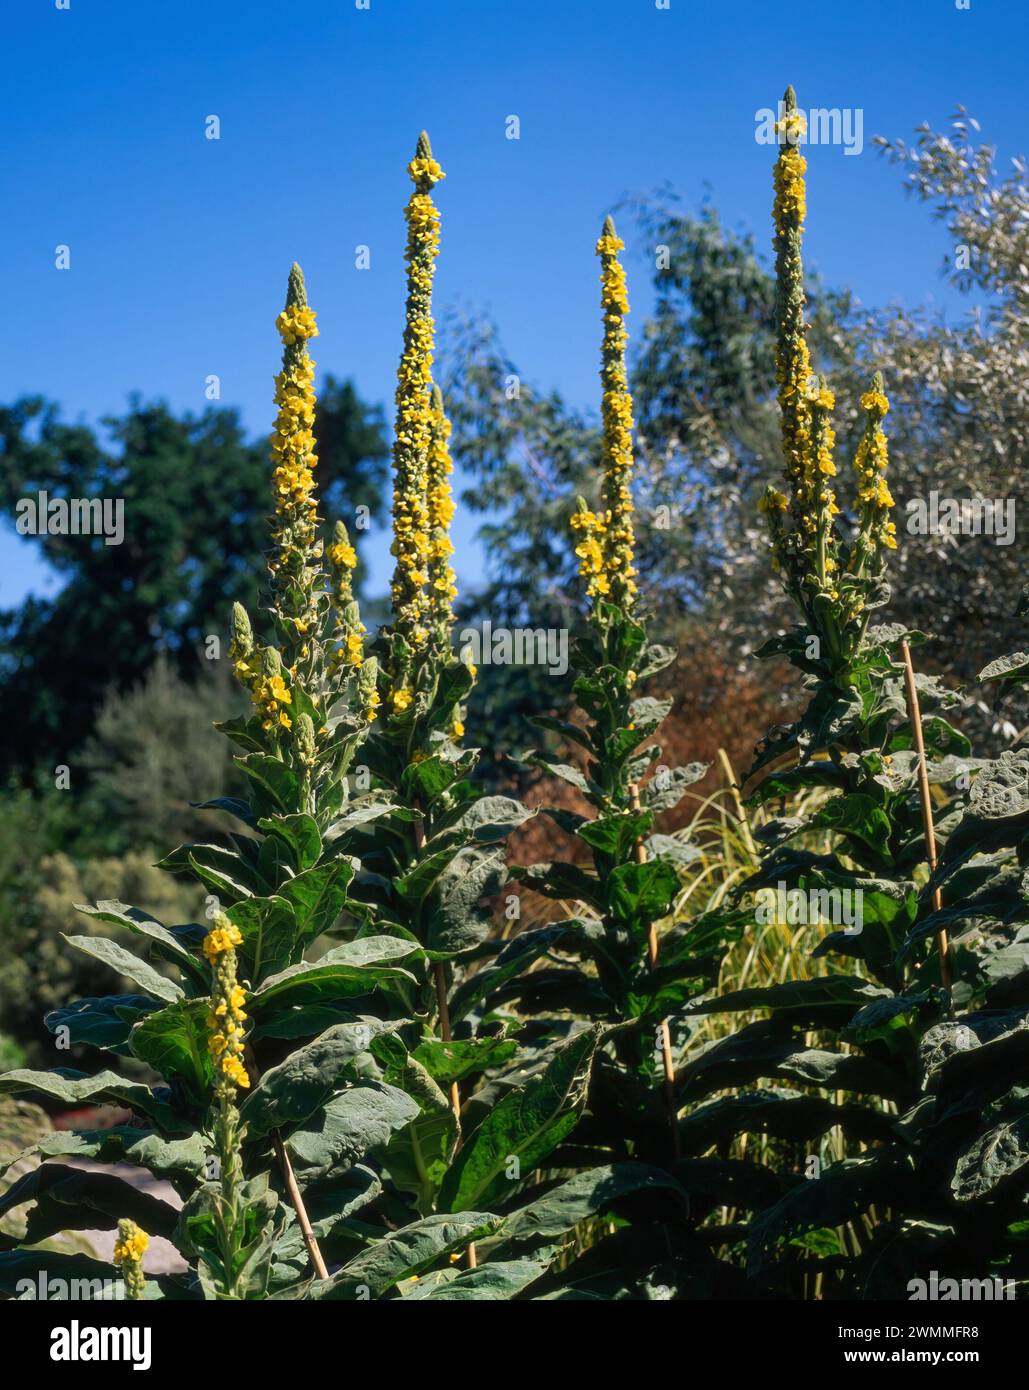 Tall stems of yellow flowers of Verbascum thapsus great mullein / Aaron's rod growing in English garden in July against a blue sky, England Stock Photo